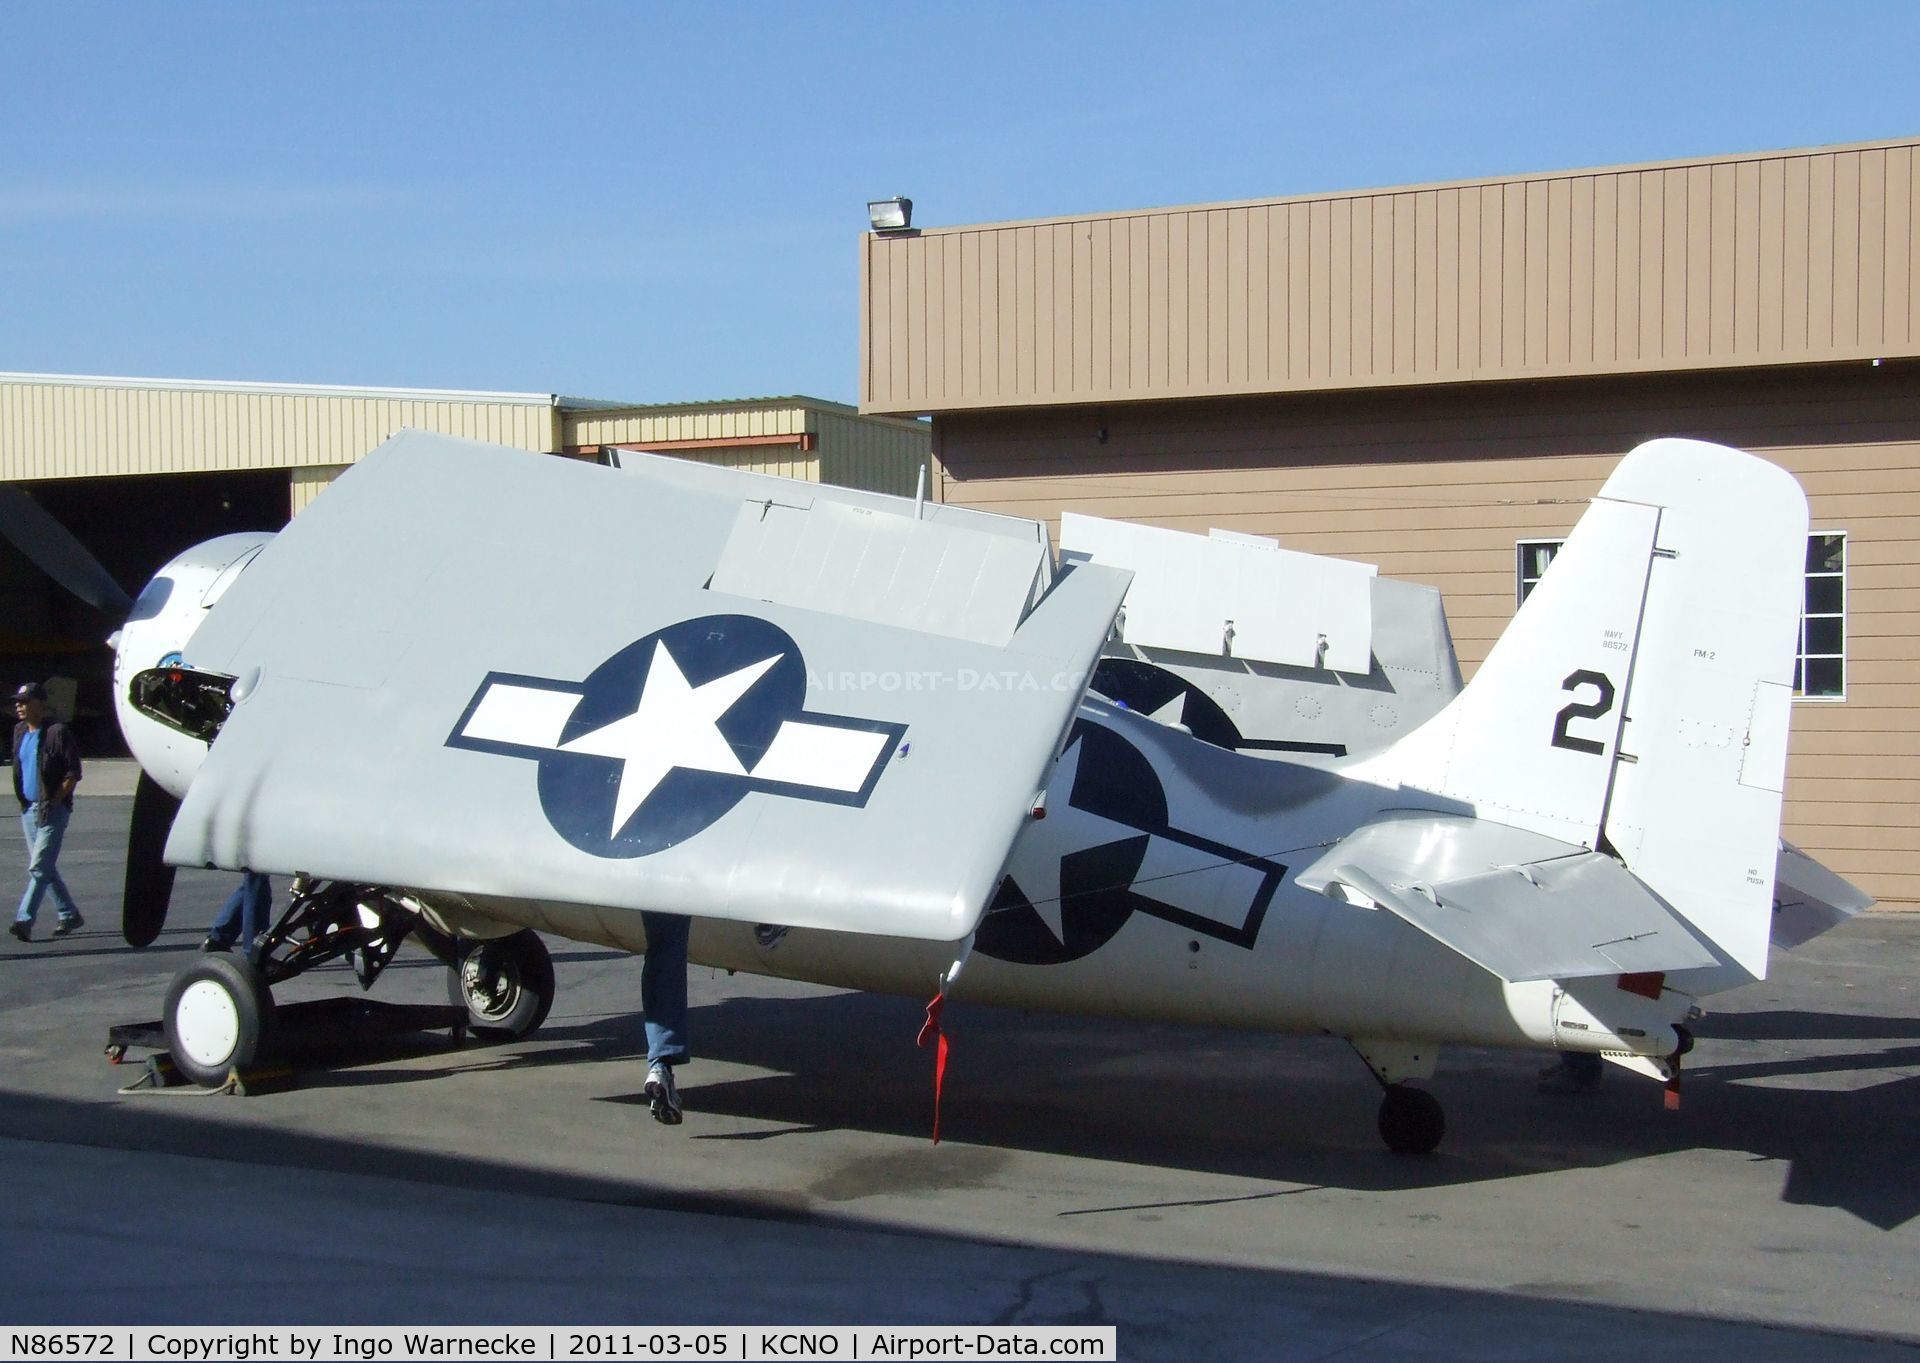 N86572, General Motors (Grumman) FM-2 Wildcat C/N 5626, Grumman (General Motors) FM-2 (F4F) Wildcat visiting for a lecture and flight demonstration at the Planes of Fame Museum, Chino CA